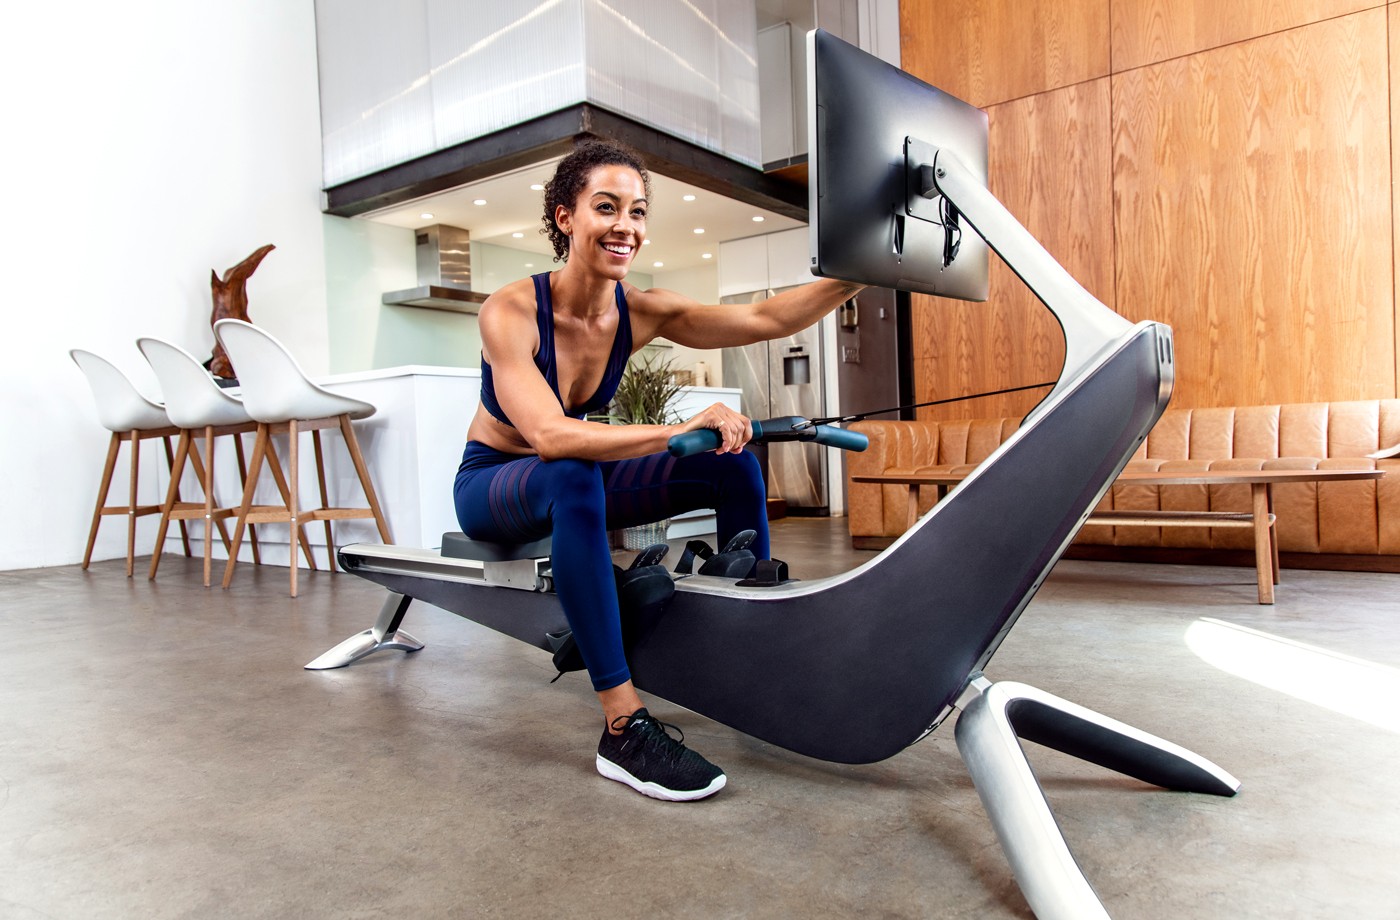 The rowing version of Peloton wants you to feel like you're on an IRL river